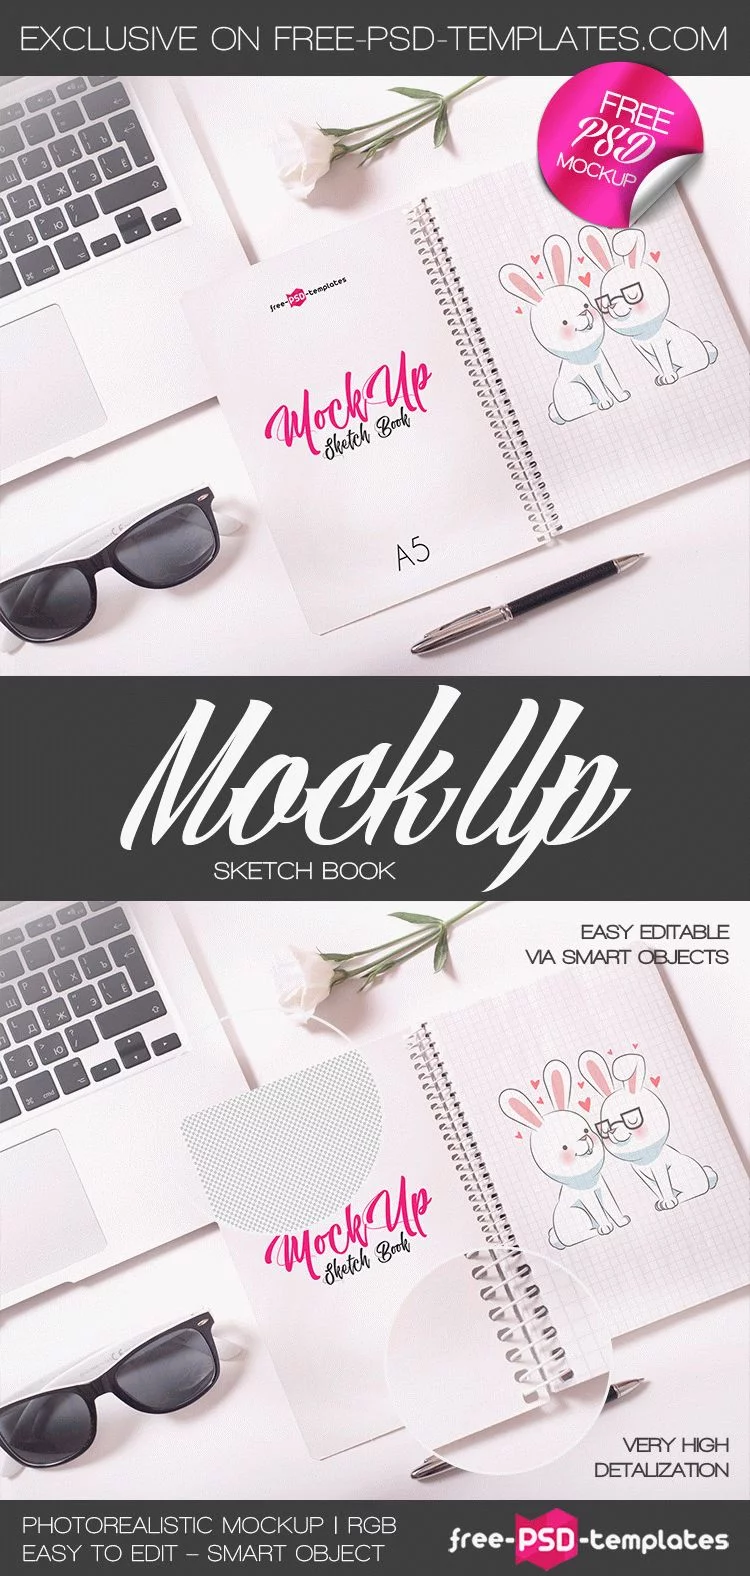 Free Sketch Book Mock-up in PSD